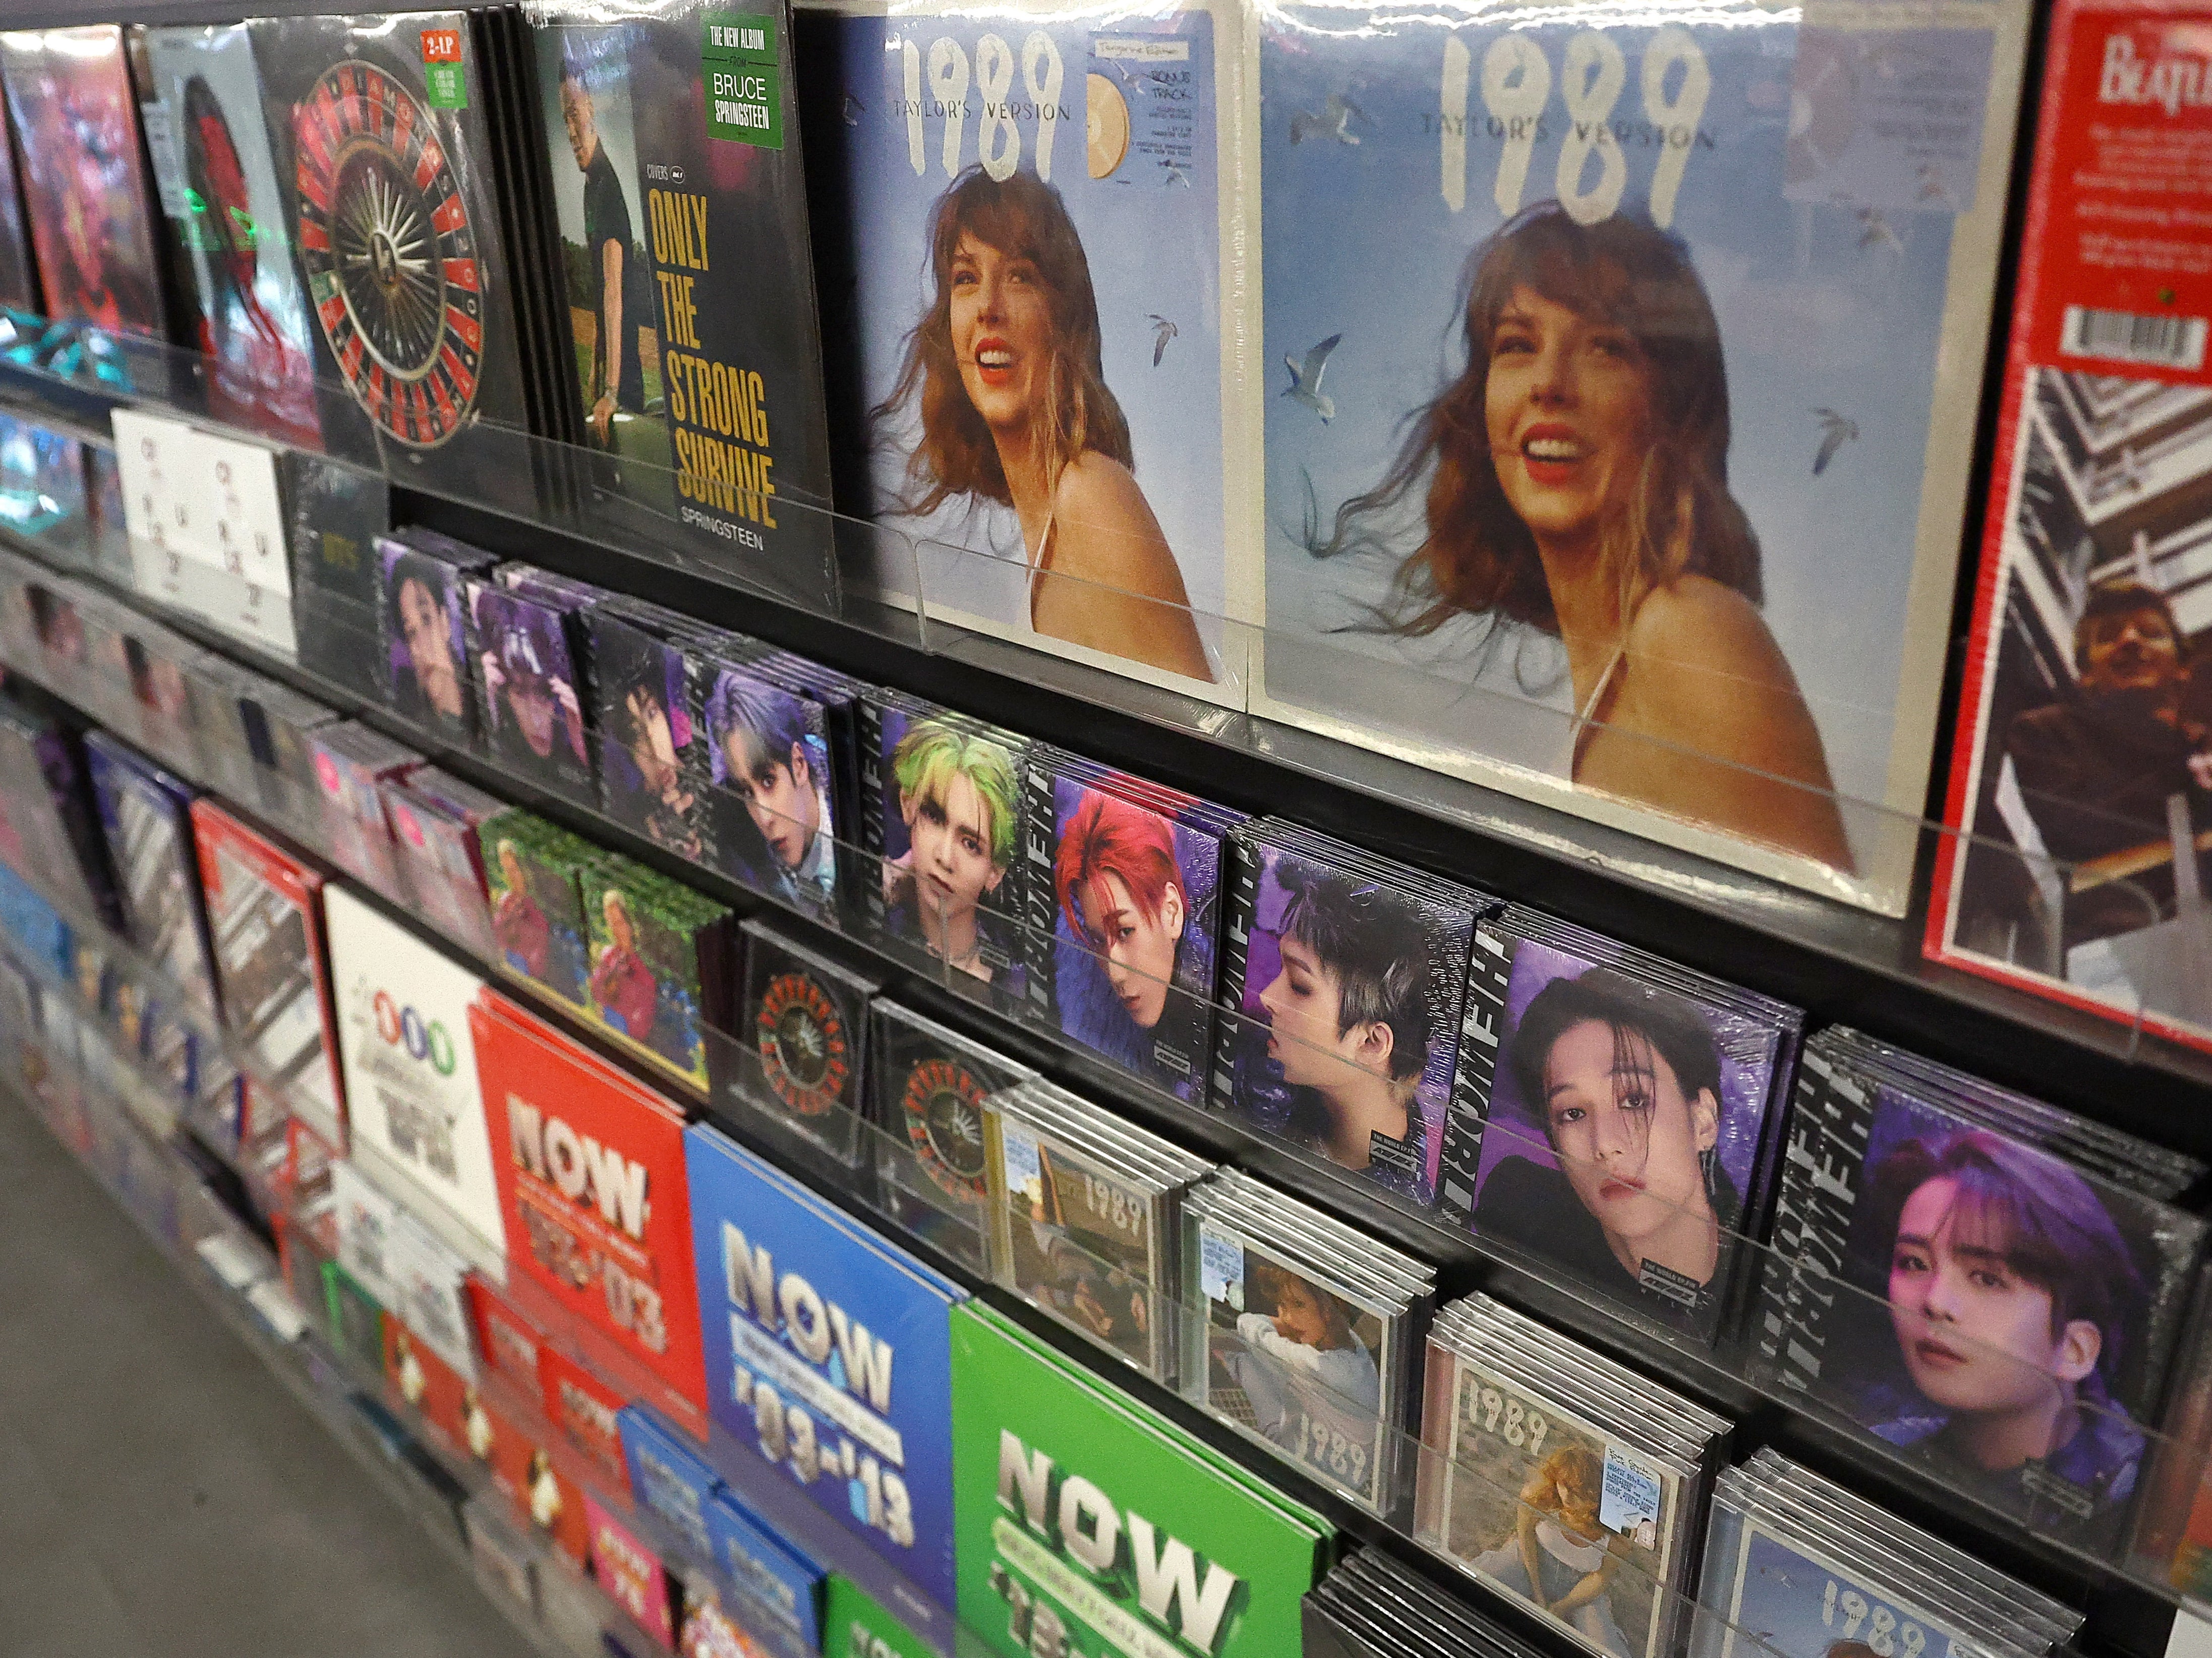 Vinyl records and CDs on sale at HMV’s flagship store on Oxford Street, London